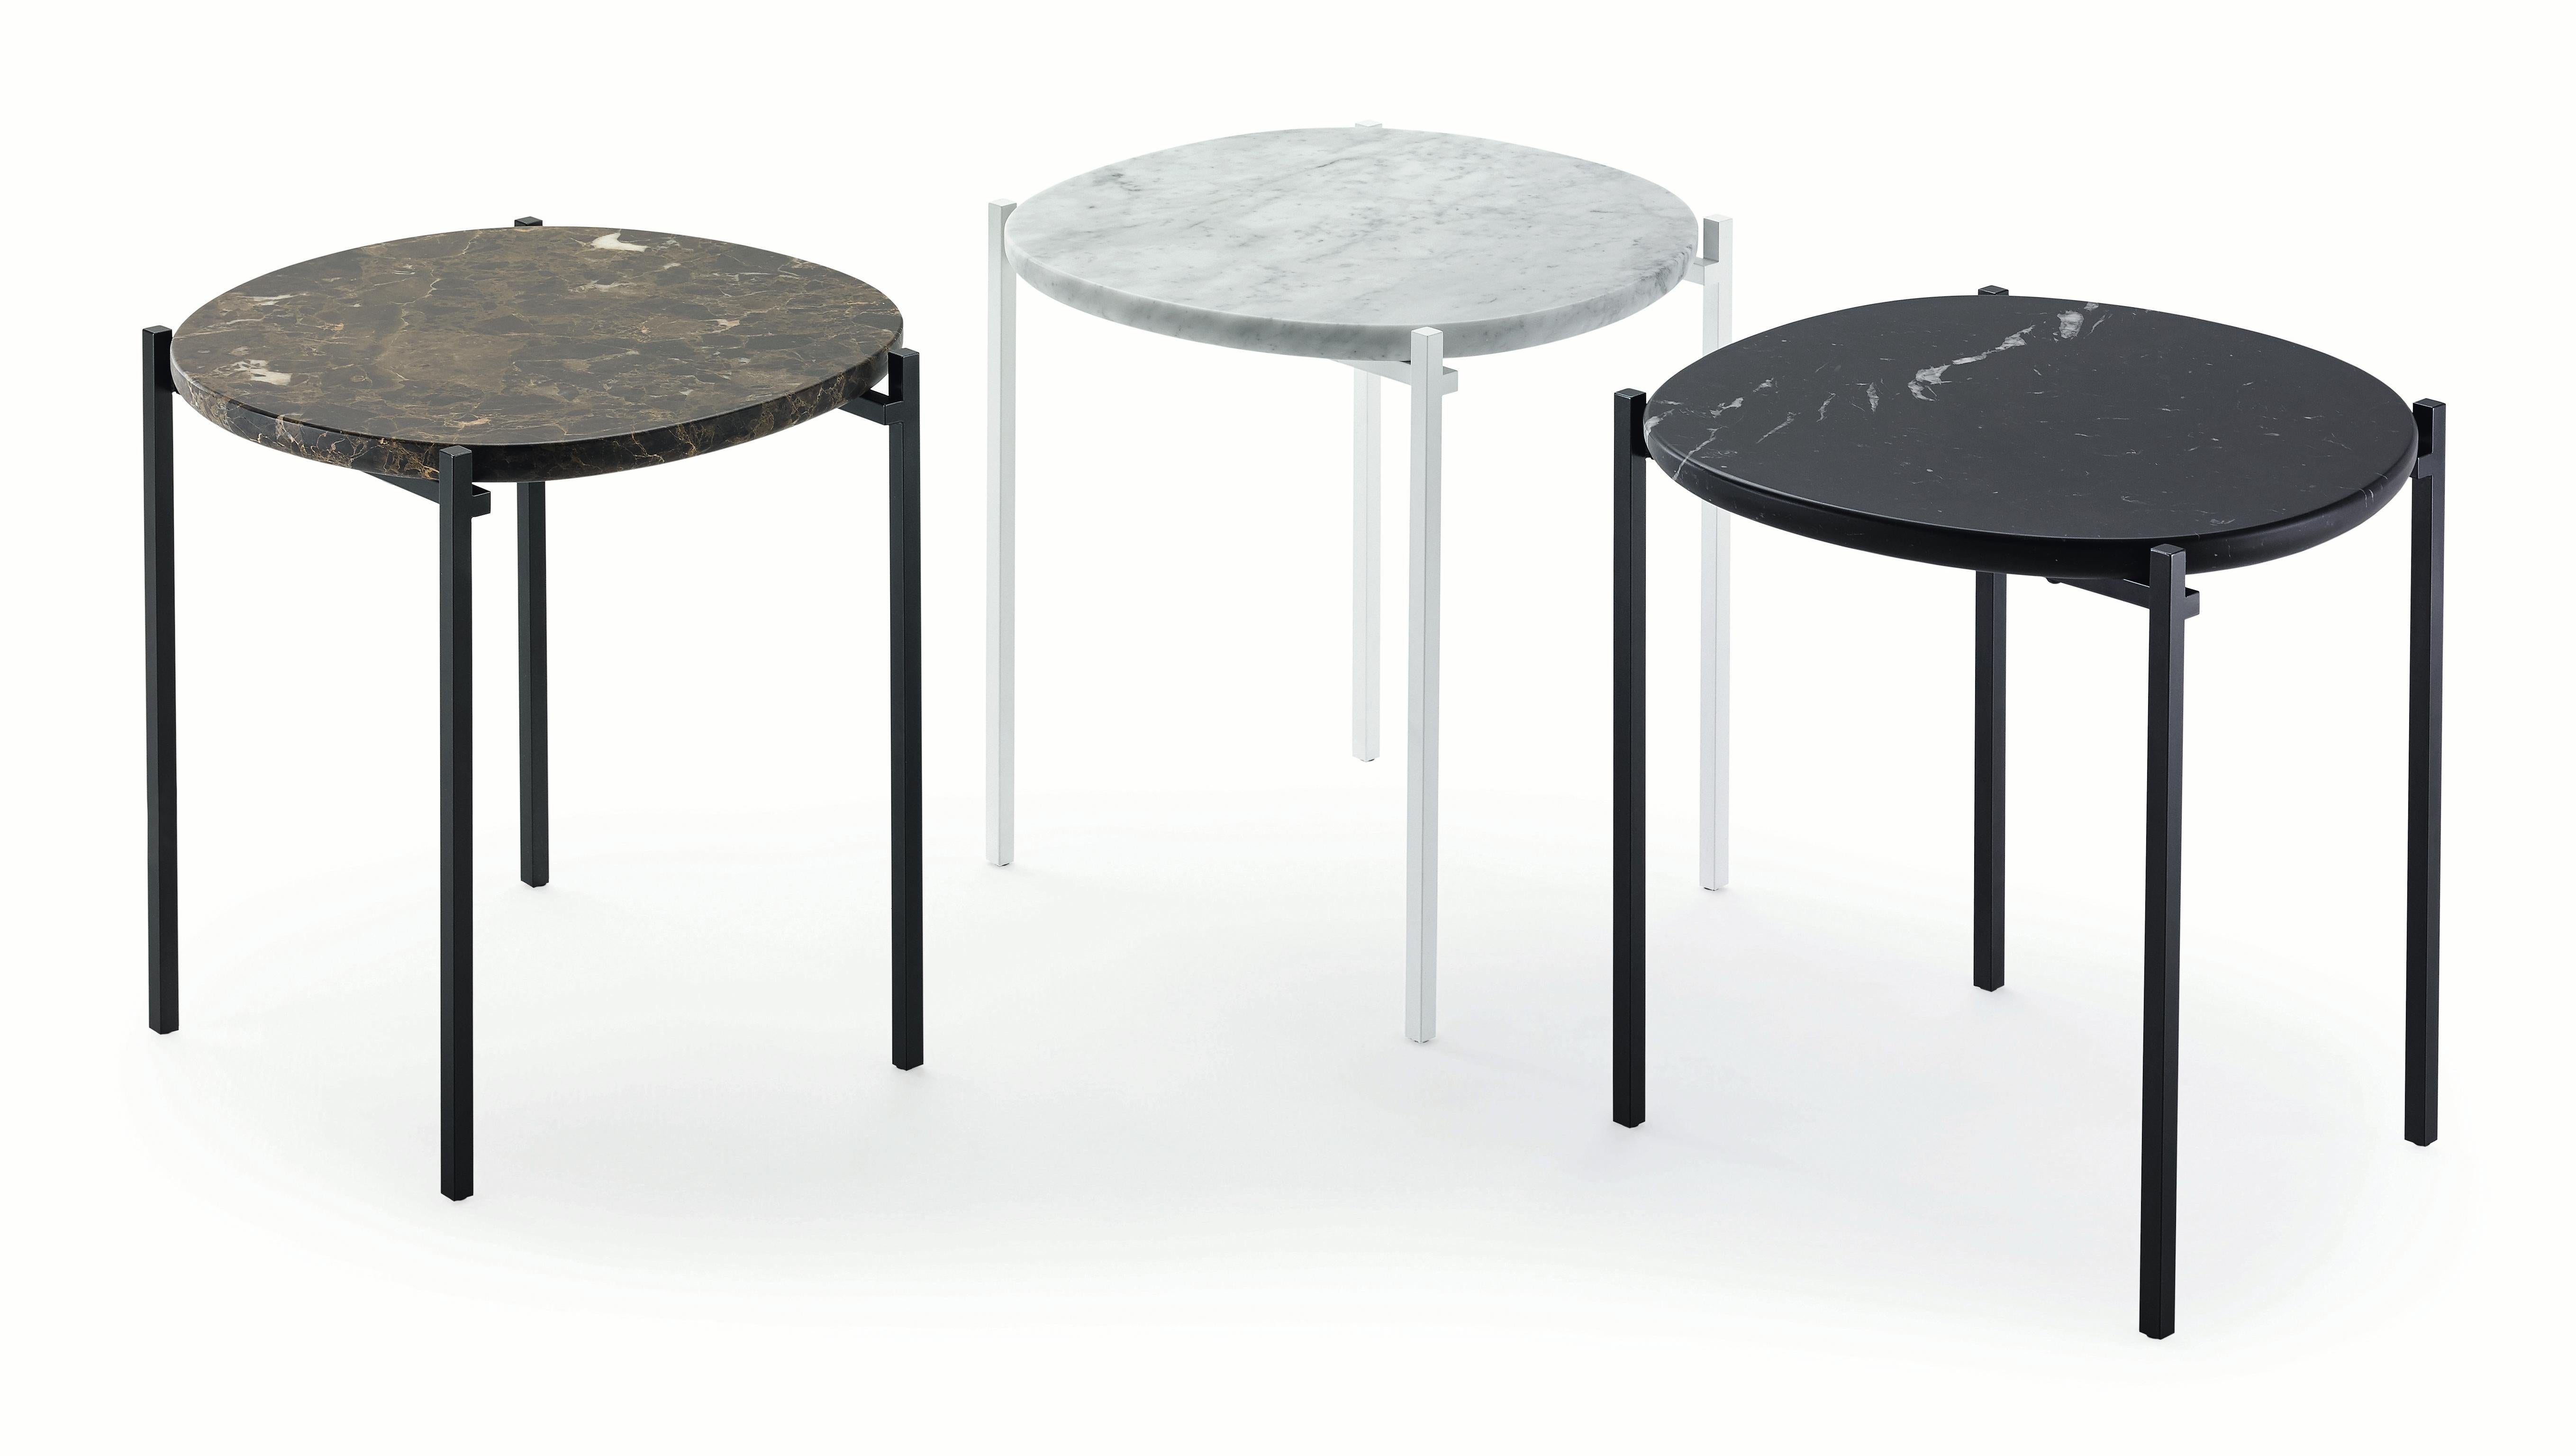 Zanotta Niobe Small Table with White Carrara Marble Top by Federica Capitani

Small table. Steel frame painted in the shades black or white. Tops available either in white Carrara marble, in black Marquinia marble or in Emperador marble, with